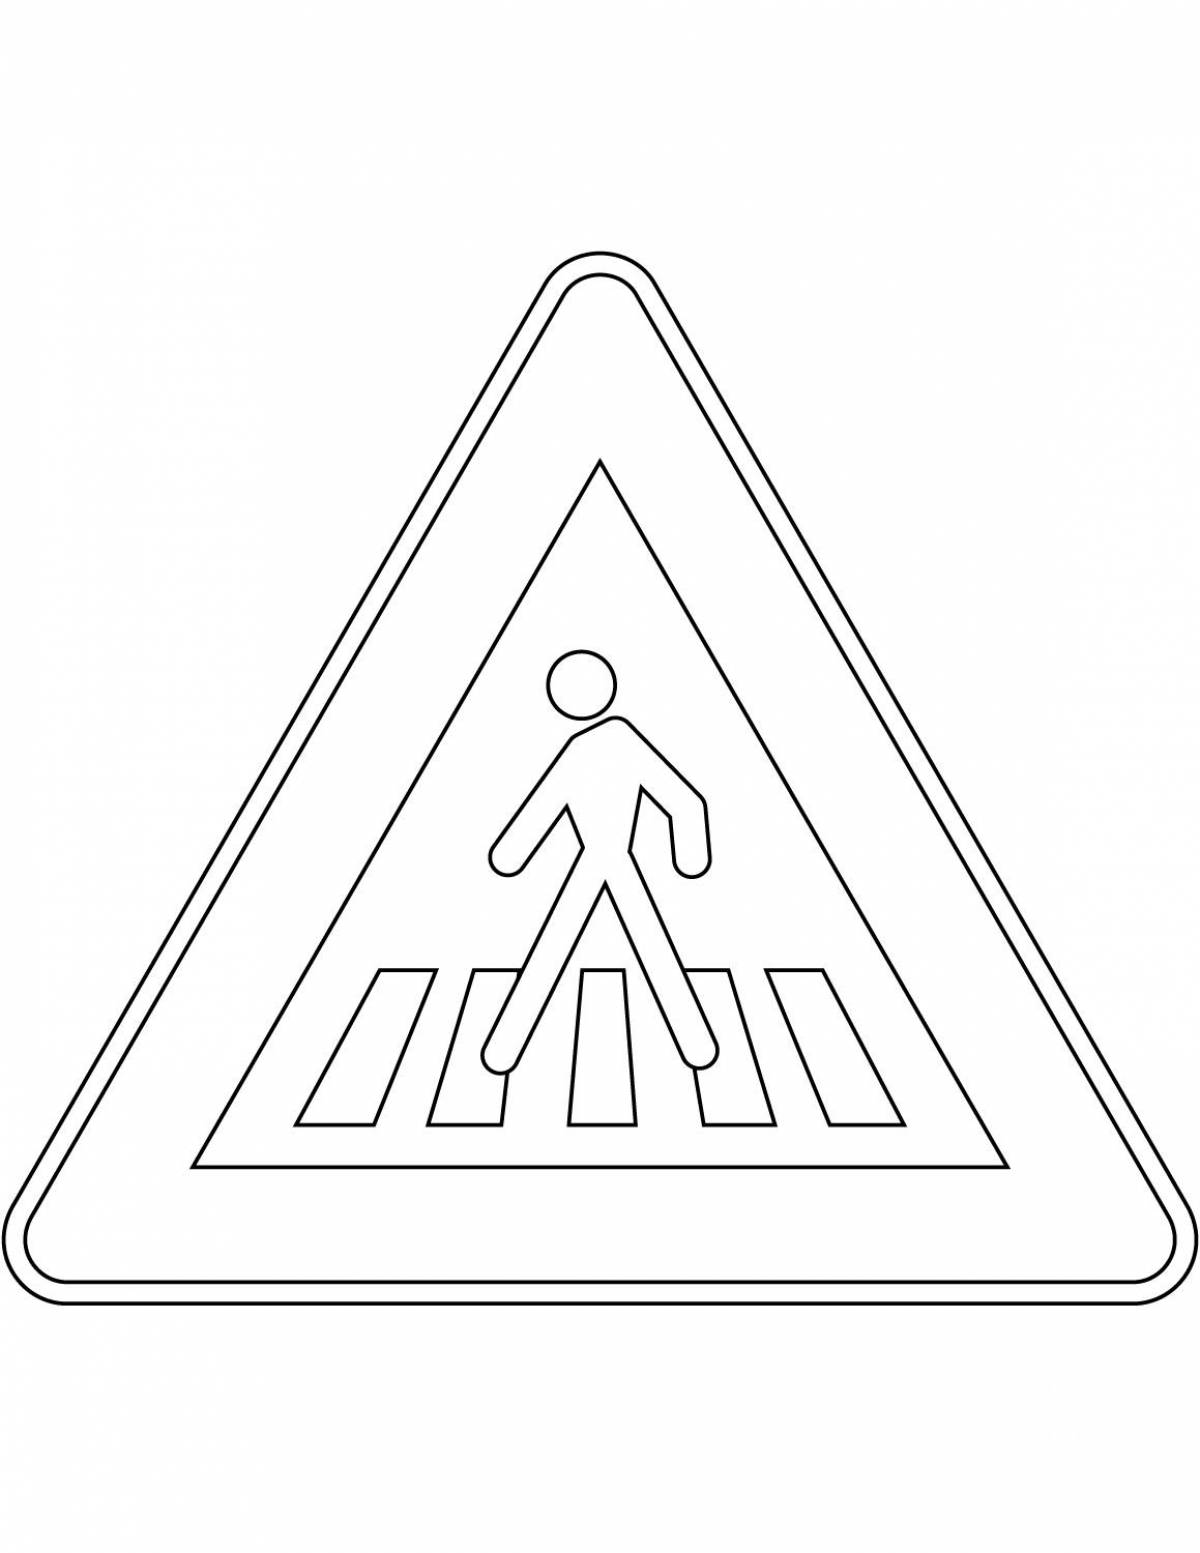 Crossing sign #5